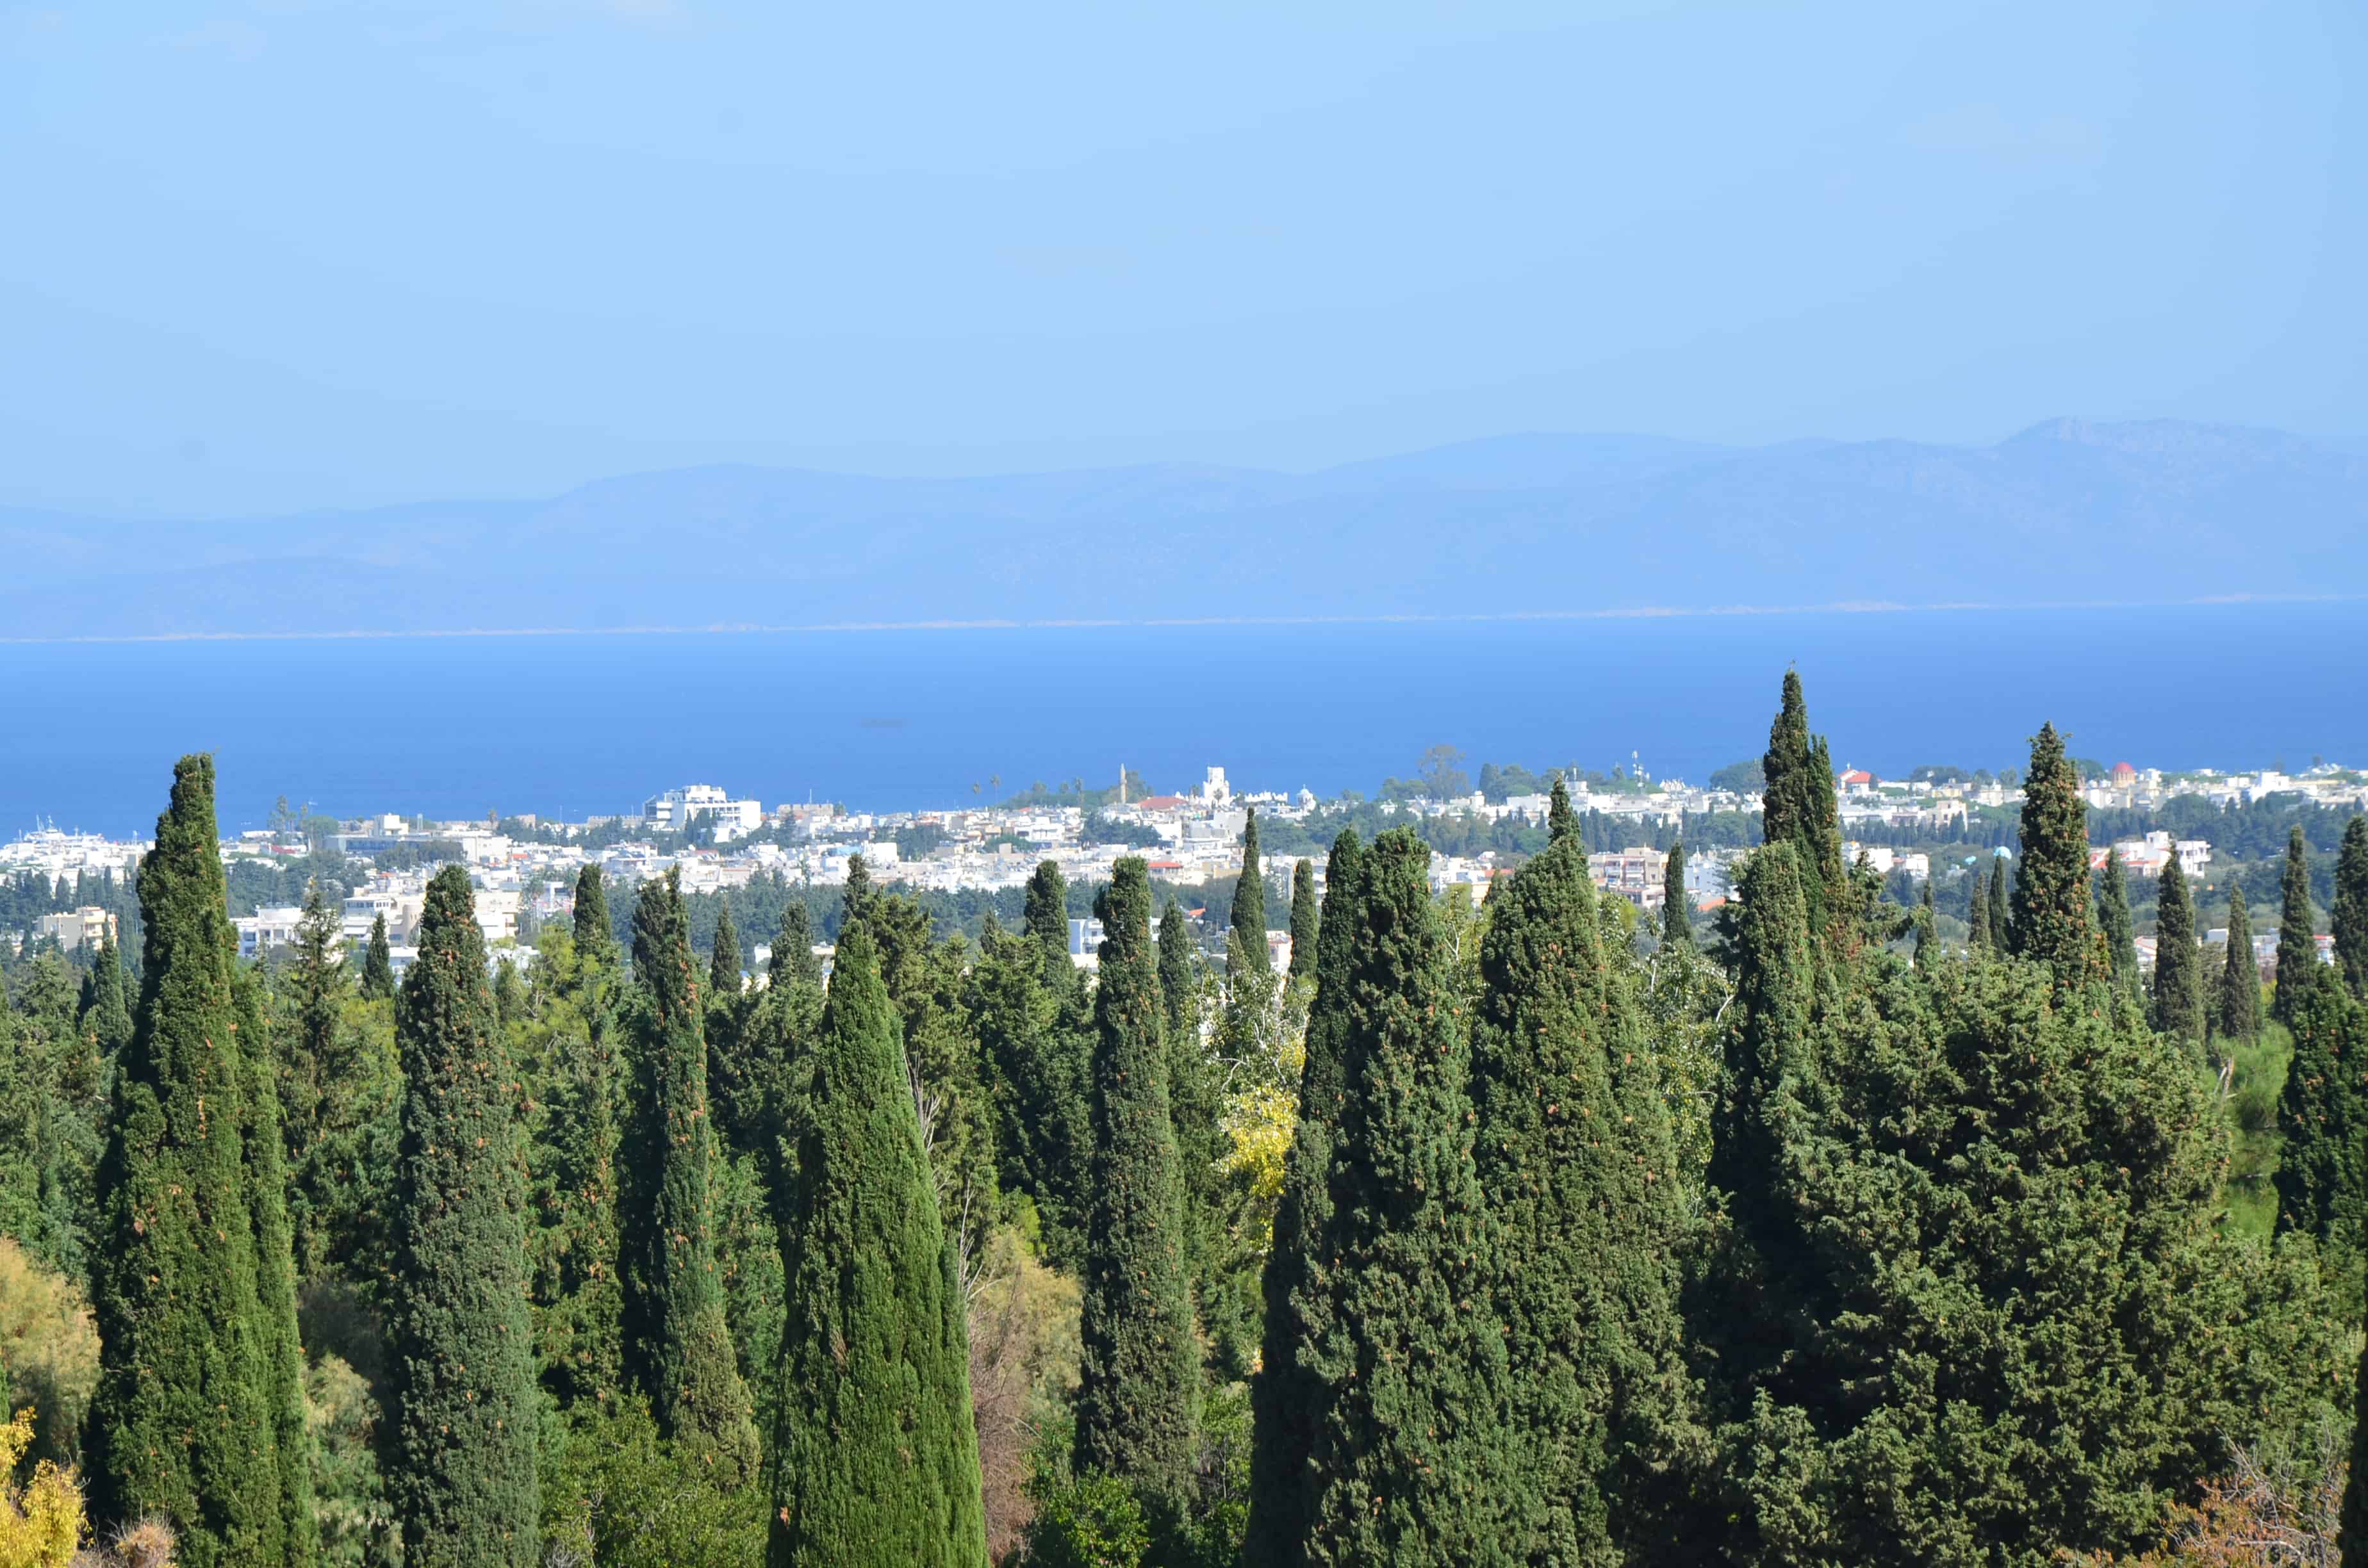 View of Kos from the Asklepeion of Kos, Greece